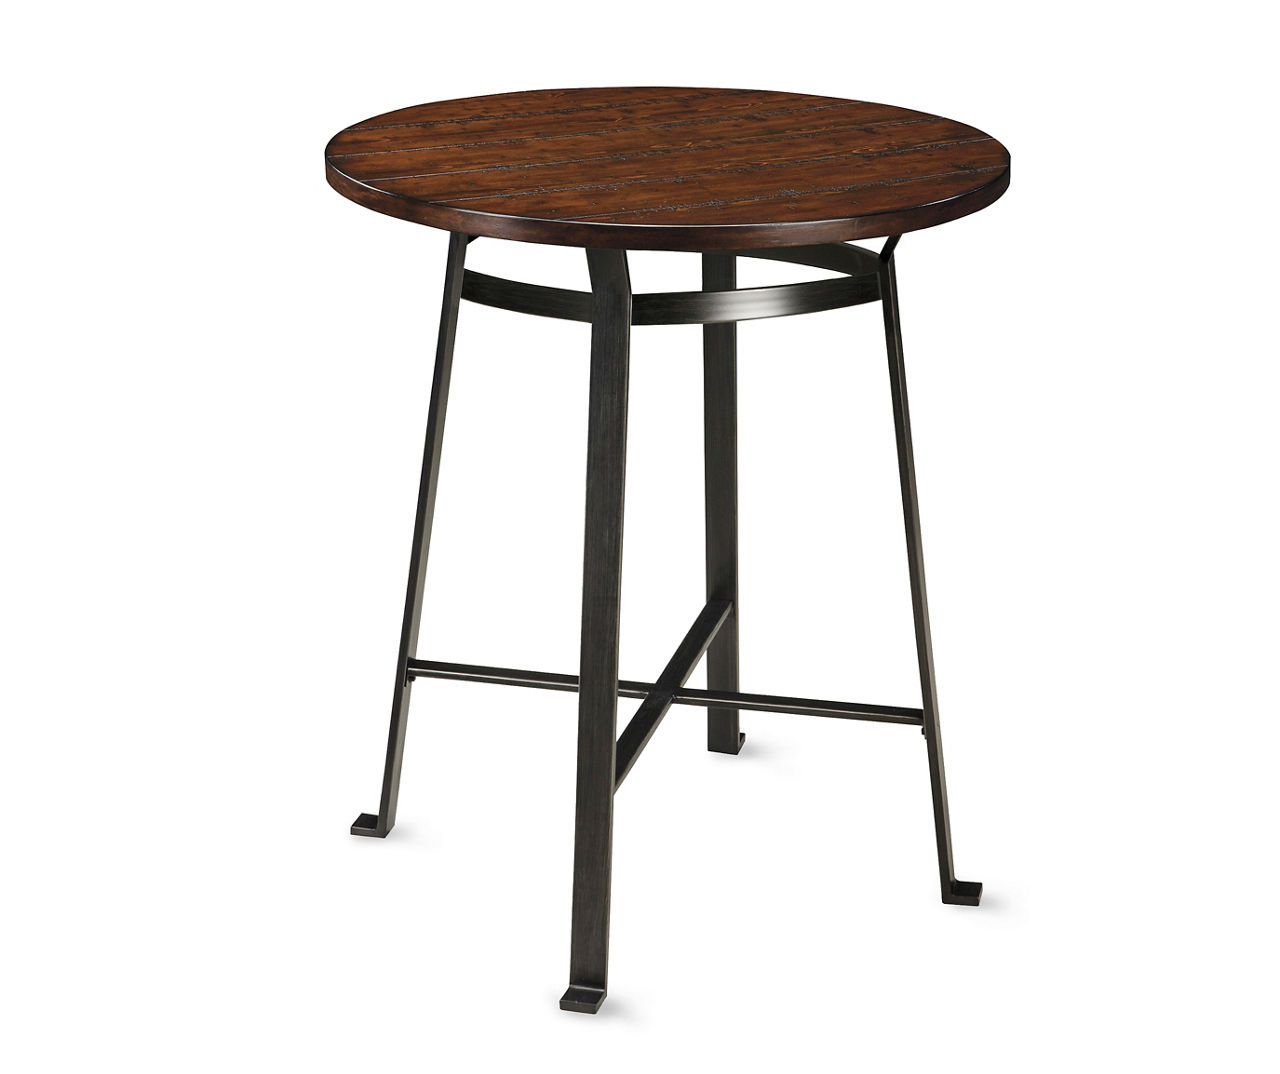 Signature Design By Ashley Challiman Rustic Brown Round Dining Pub ...